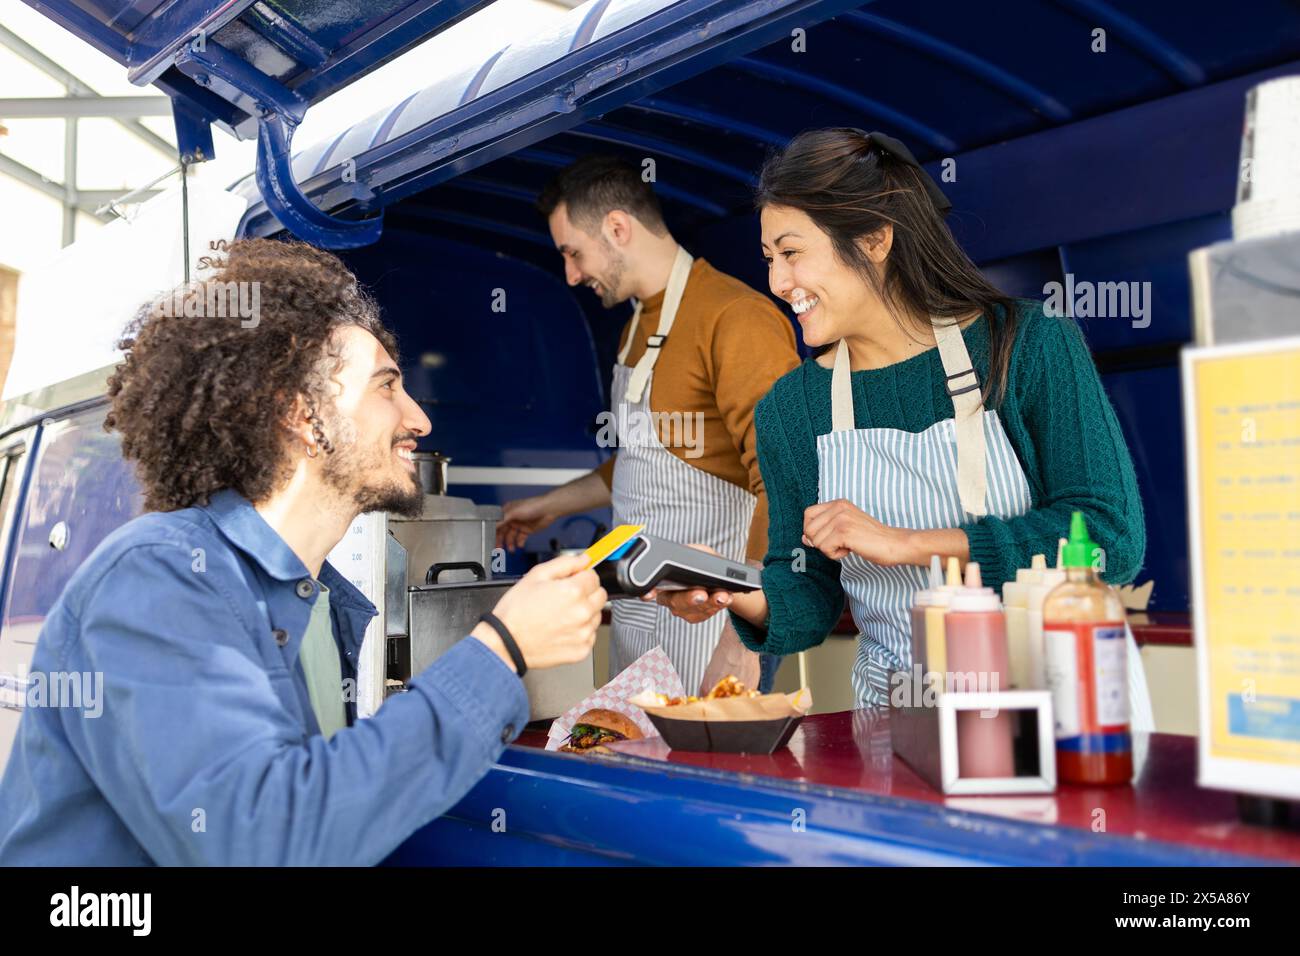 A cheerful customer pays with a card at a vibrant food truck while engaging with friendly staff Stock Photo